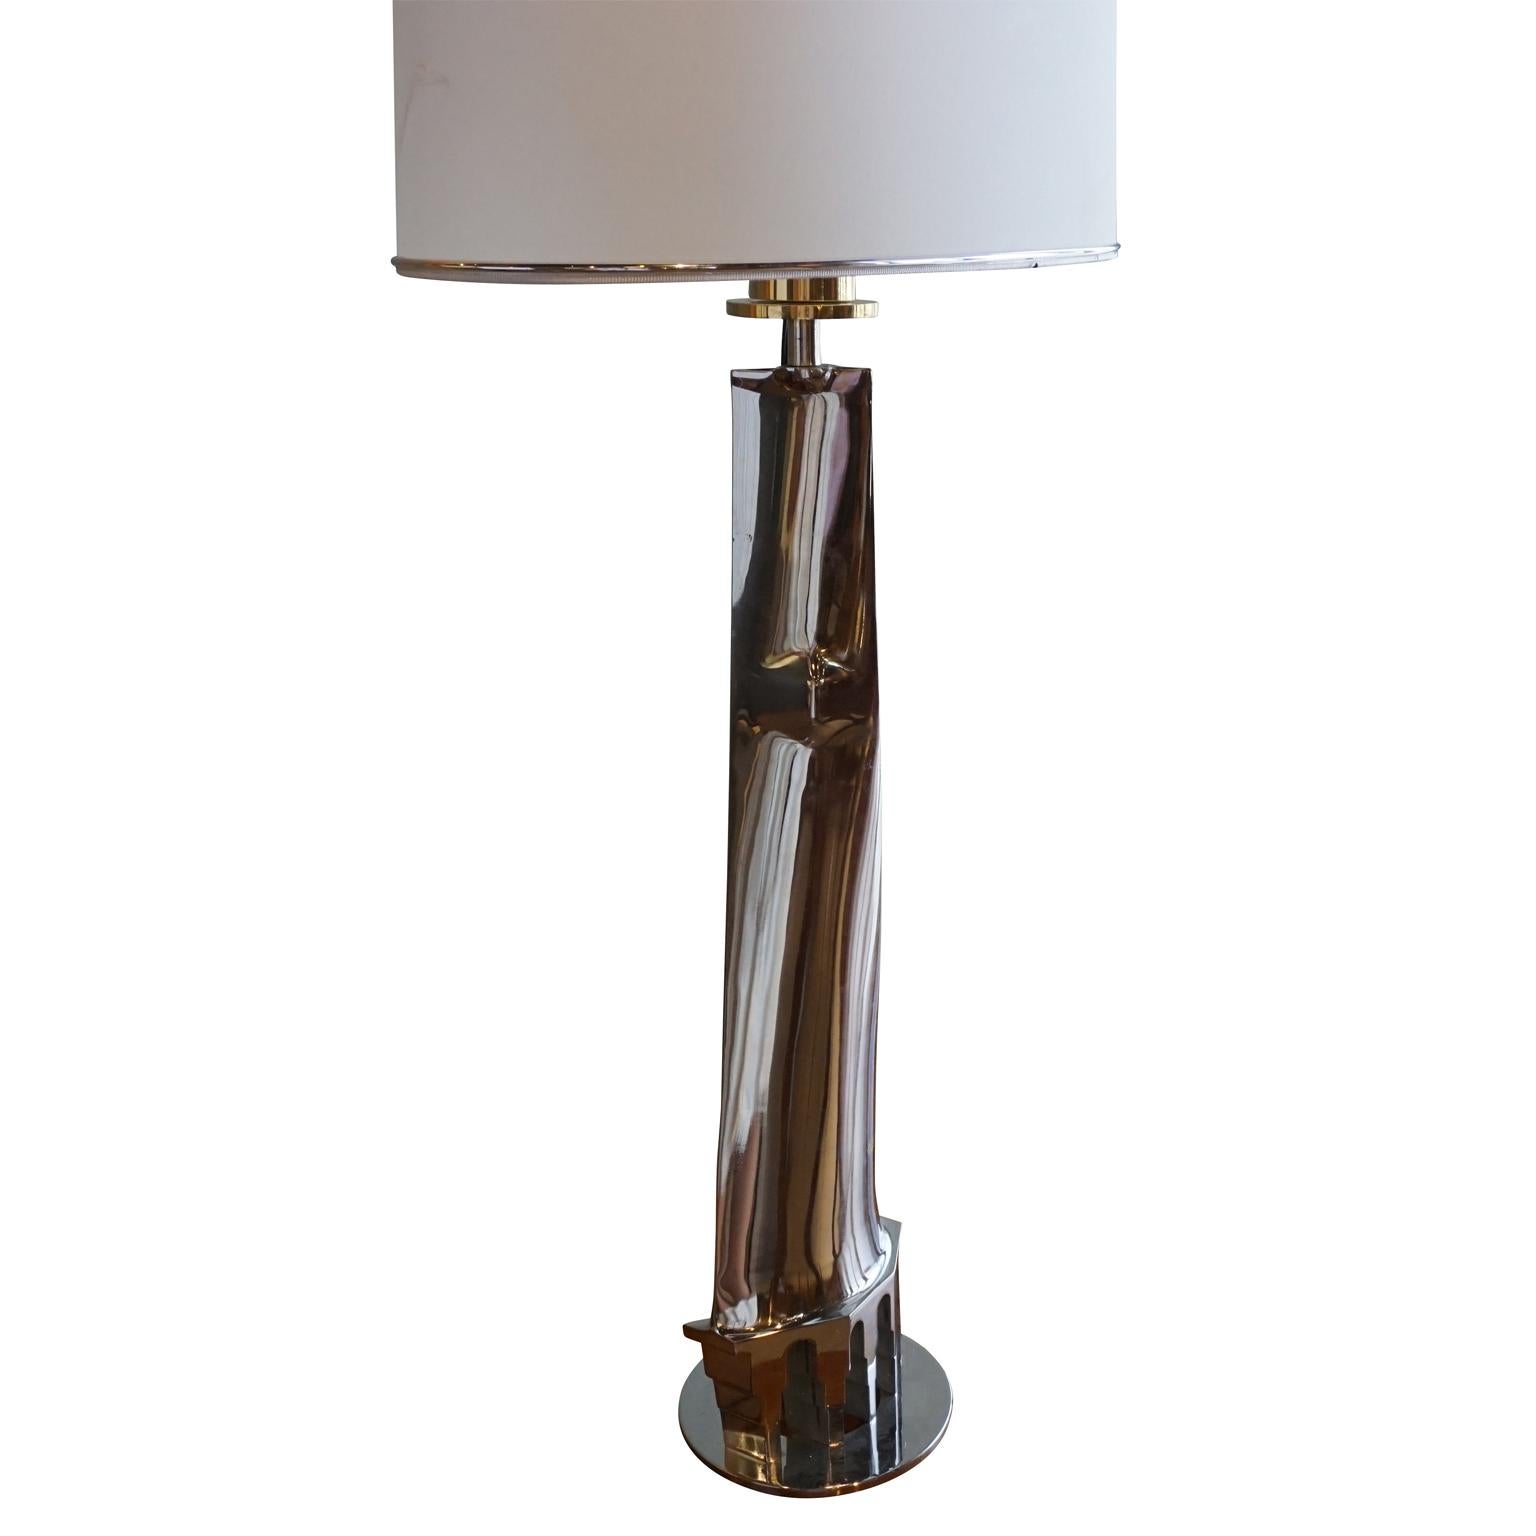 A vintage Mid-Century Modern Italian desk lamp made of chrome, featuring a one light socket. Produced by Banci Firenze, in good condition. The wires have been renewed. Wear consistent with age and use, circa 1970, Florence, Italy.

Measures: base